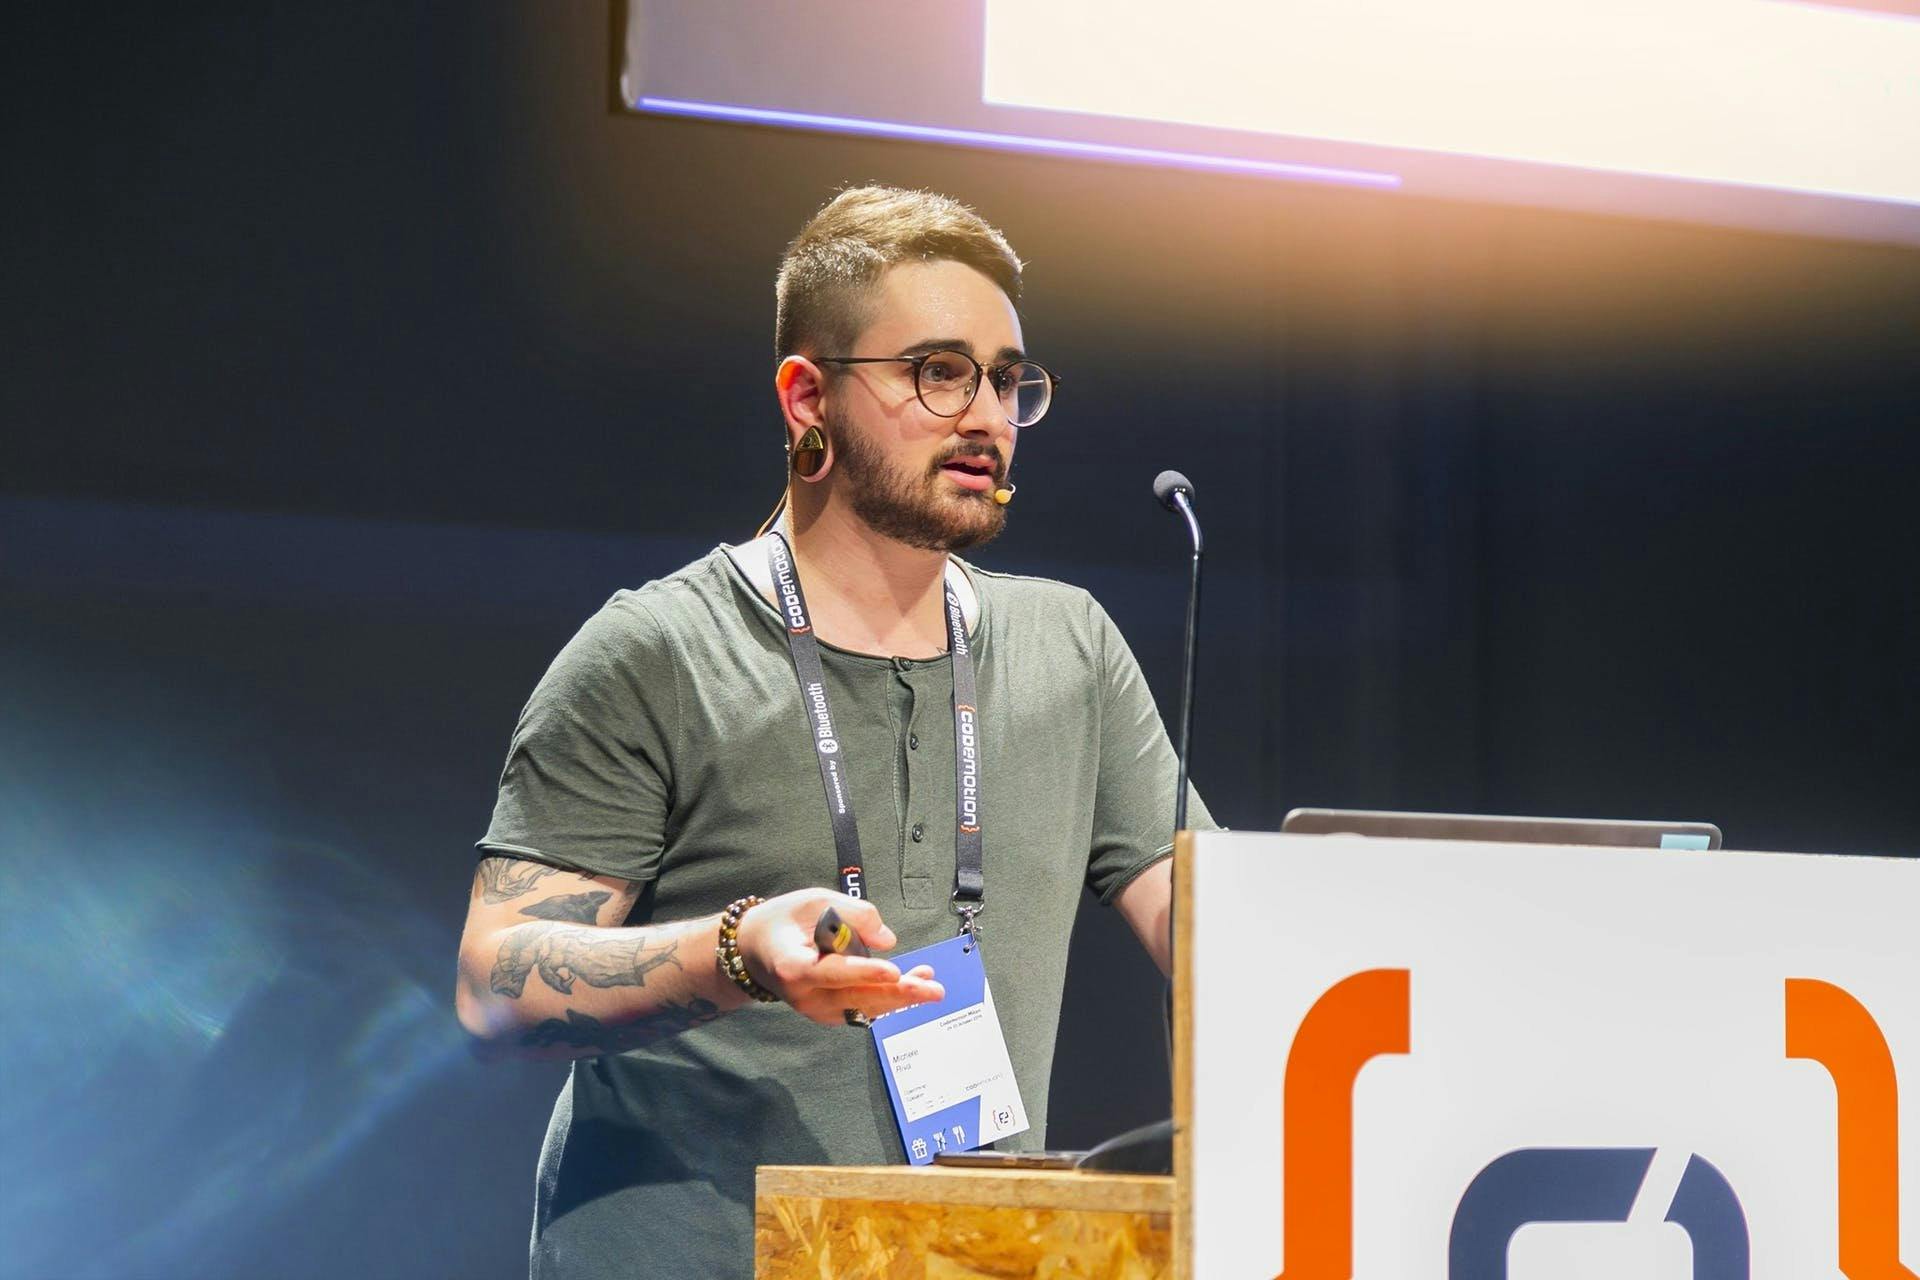 Michele Riva at Codemotion 2019, Milan, Italy